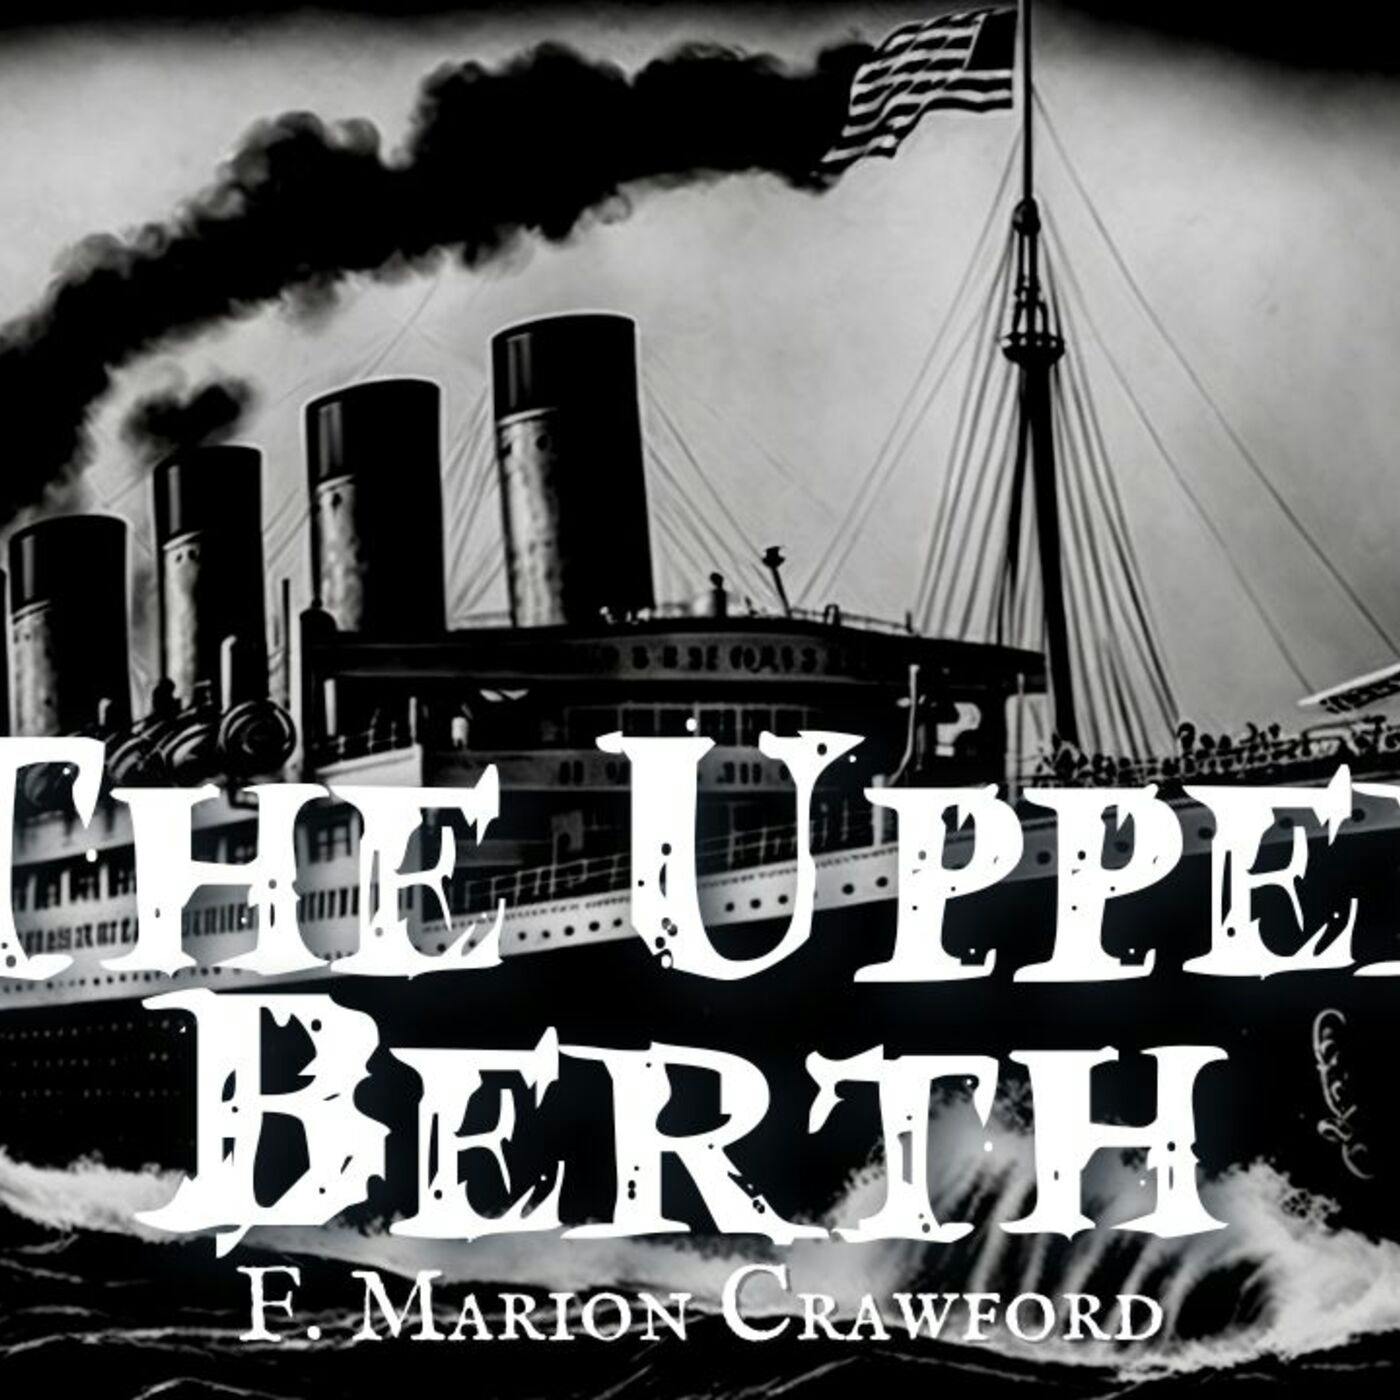 The Upper Berth by F. Marion Crawford